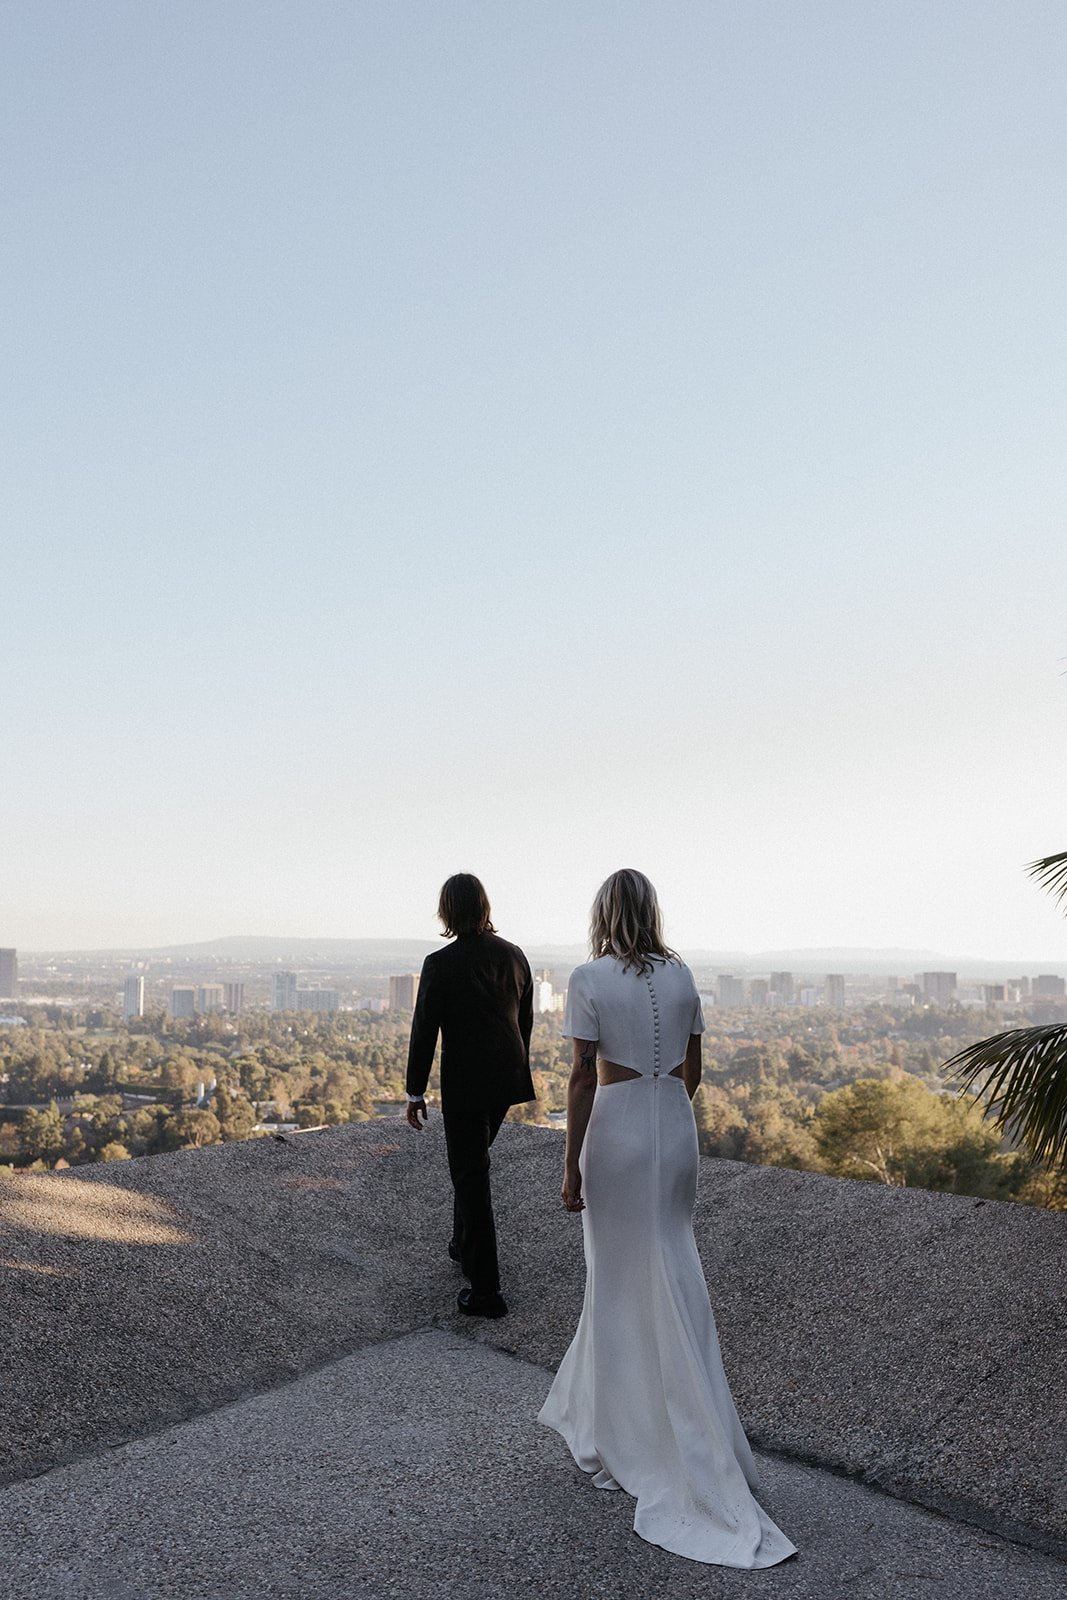 iconic views of beverly hills and los angeles at the Sheats–Goldstein Residence